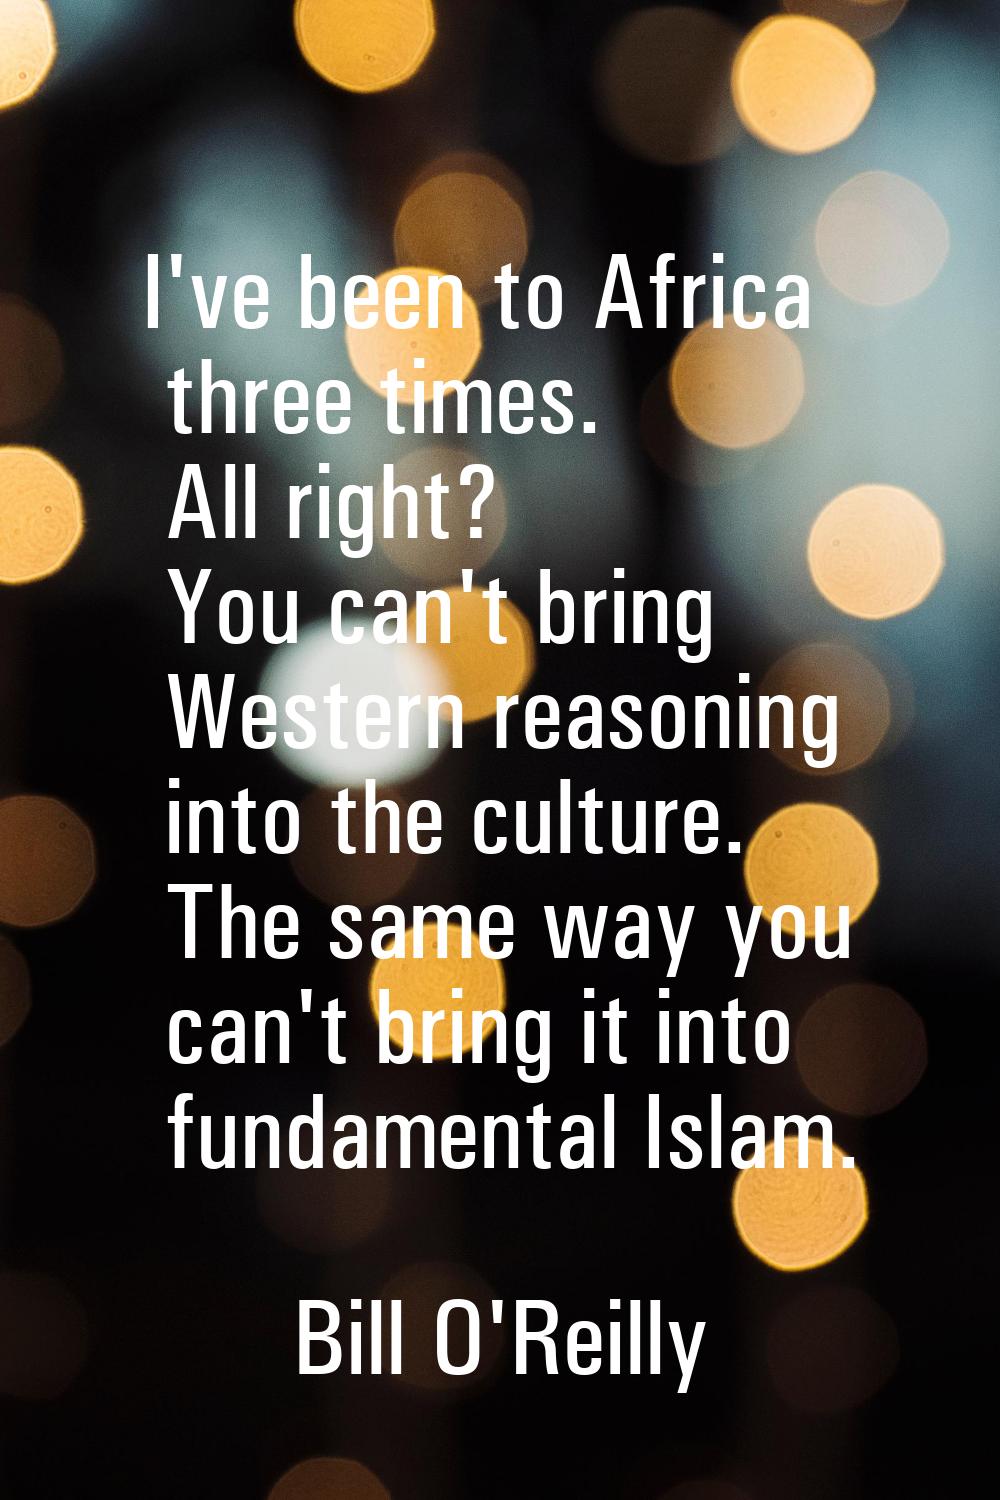 I've been to Africa three times. All right? You can't bring Western reasoning into the culture. The